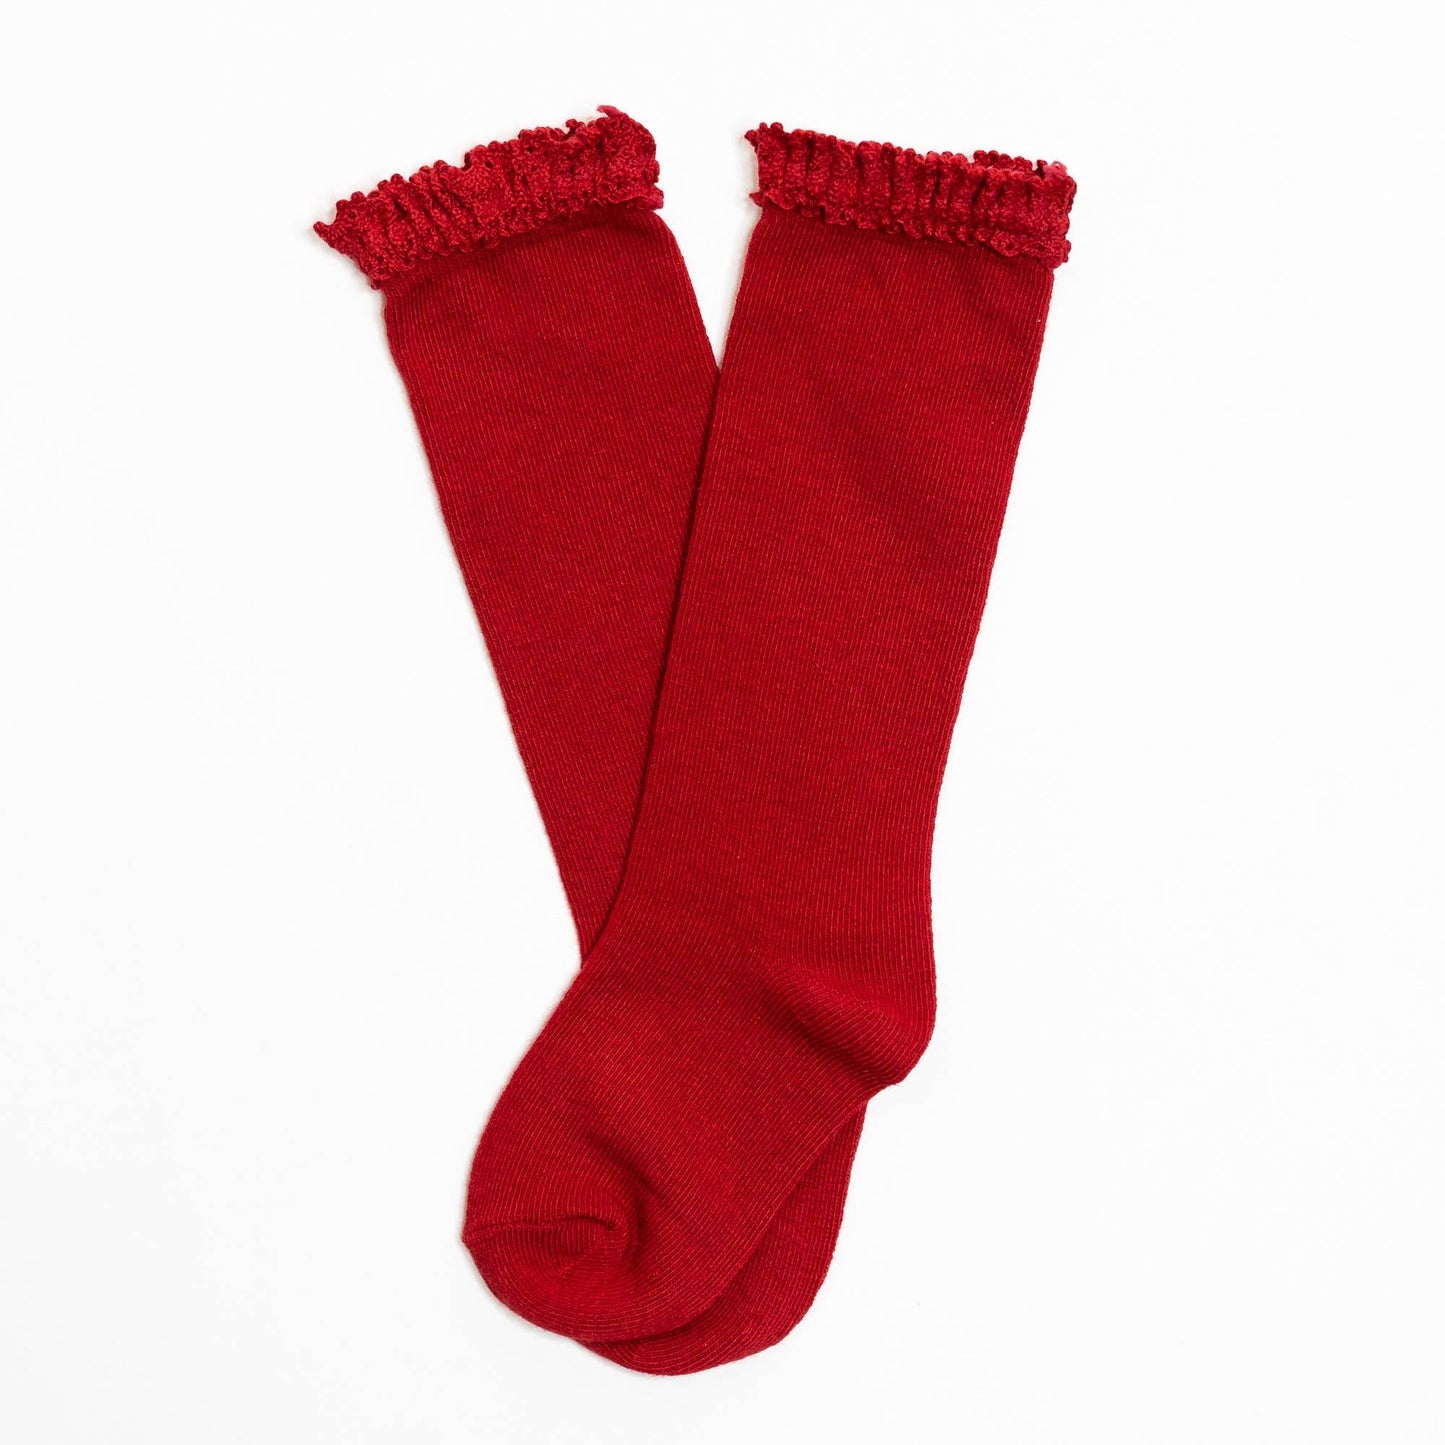 Lace Top Knee Highs in True Red  - Doodlebug's Children's Boutique